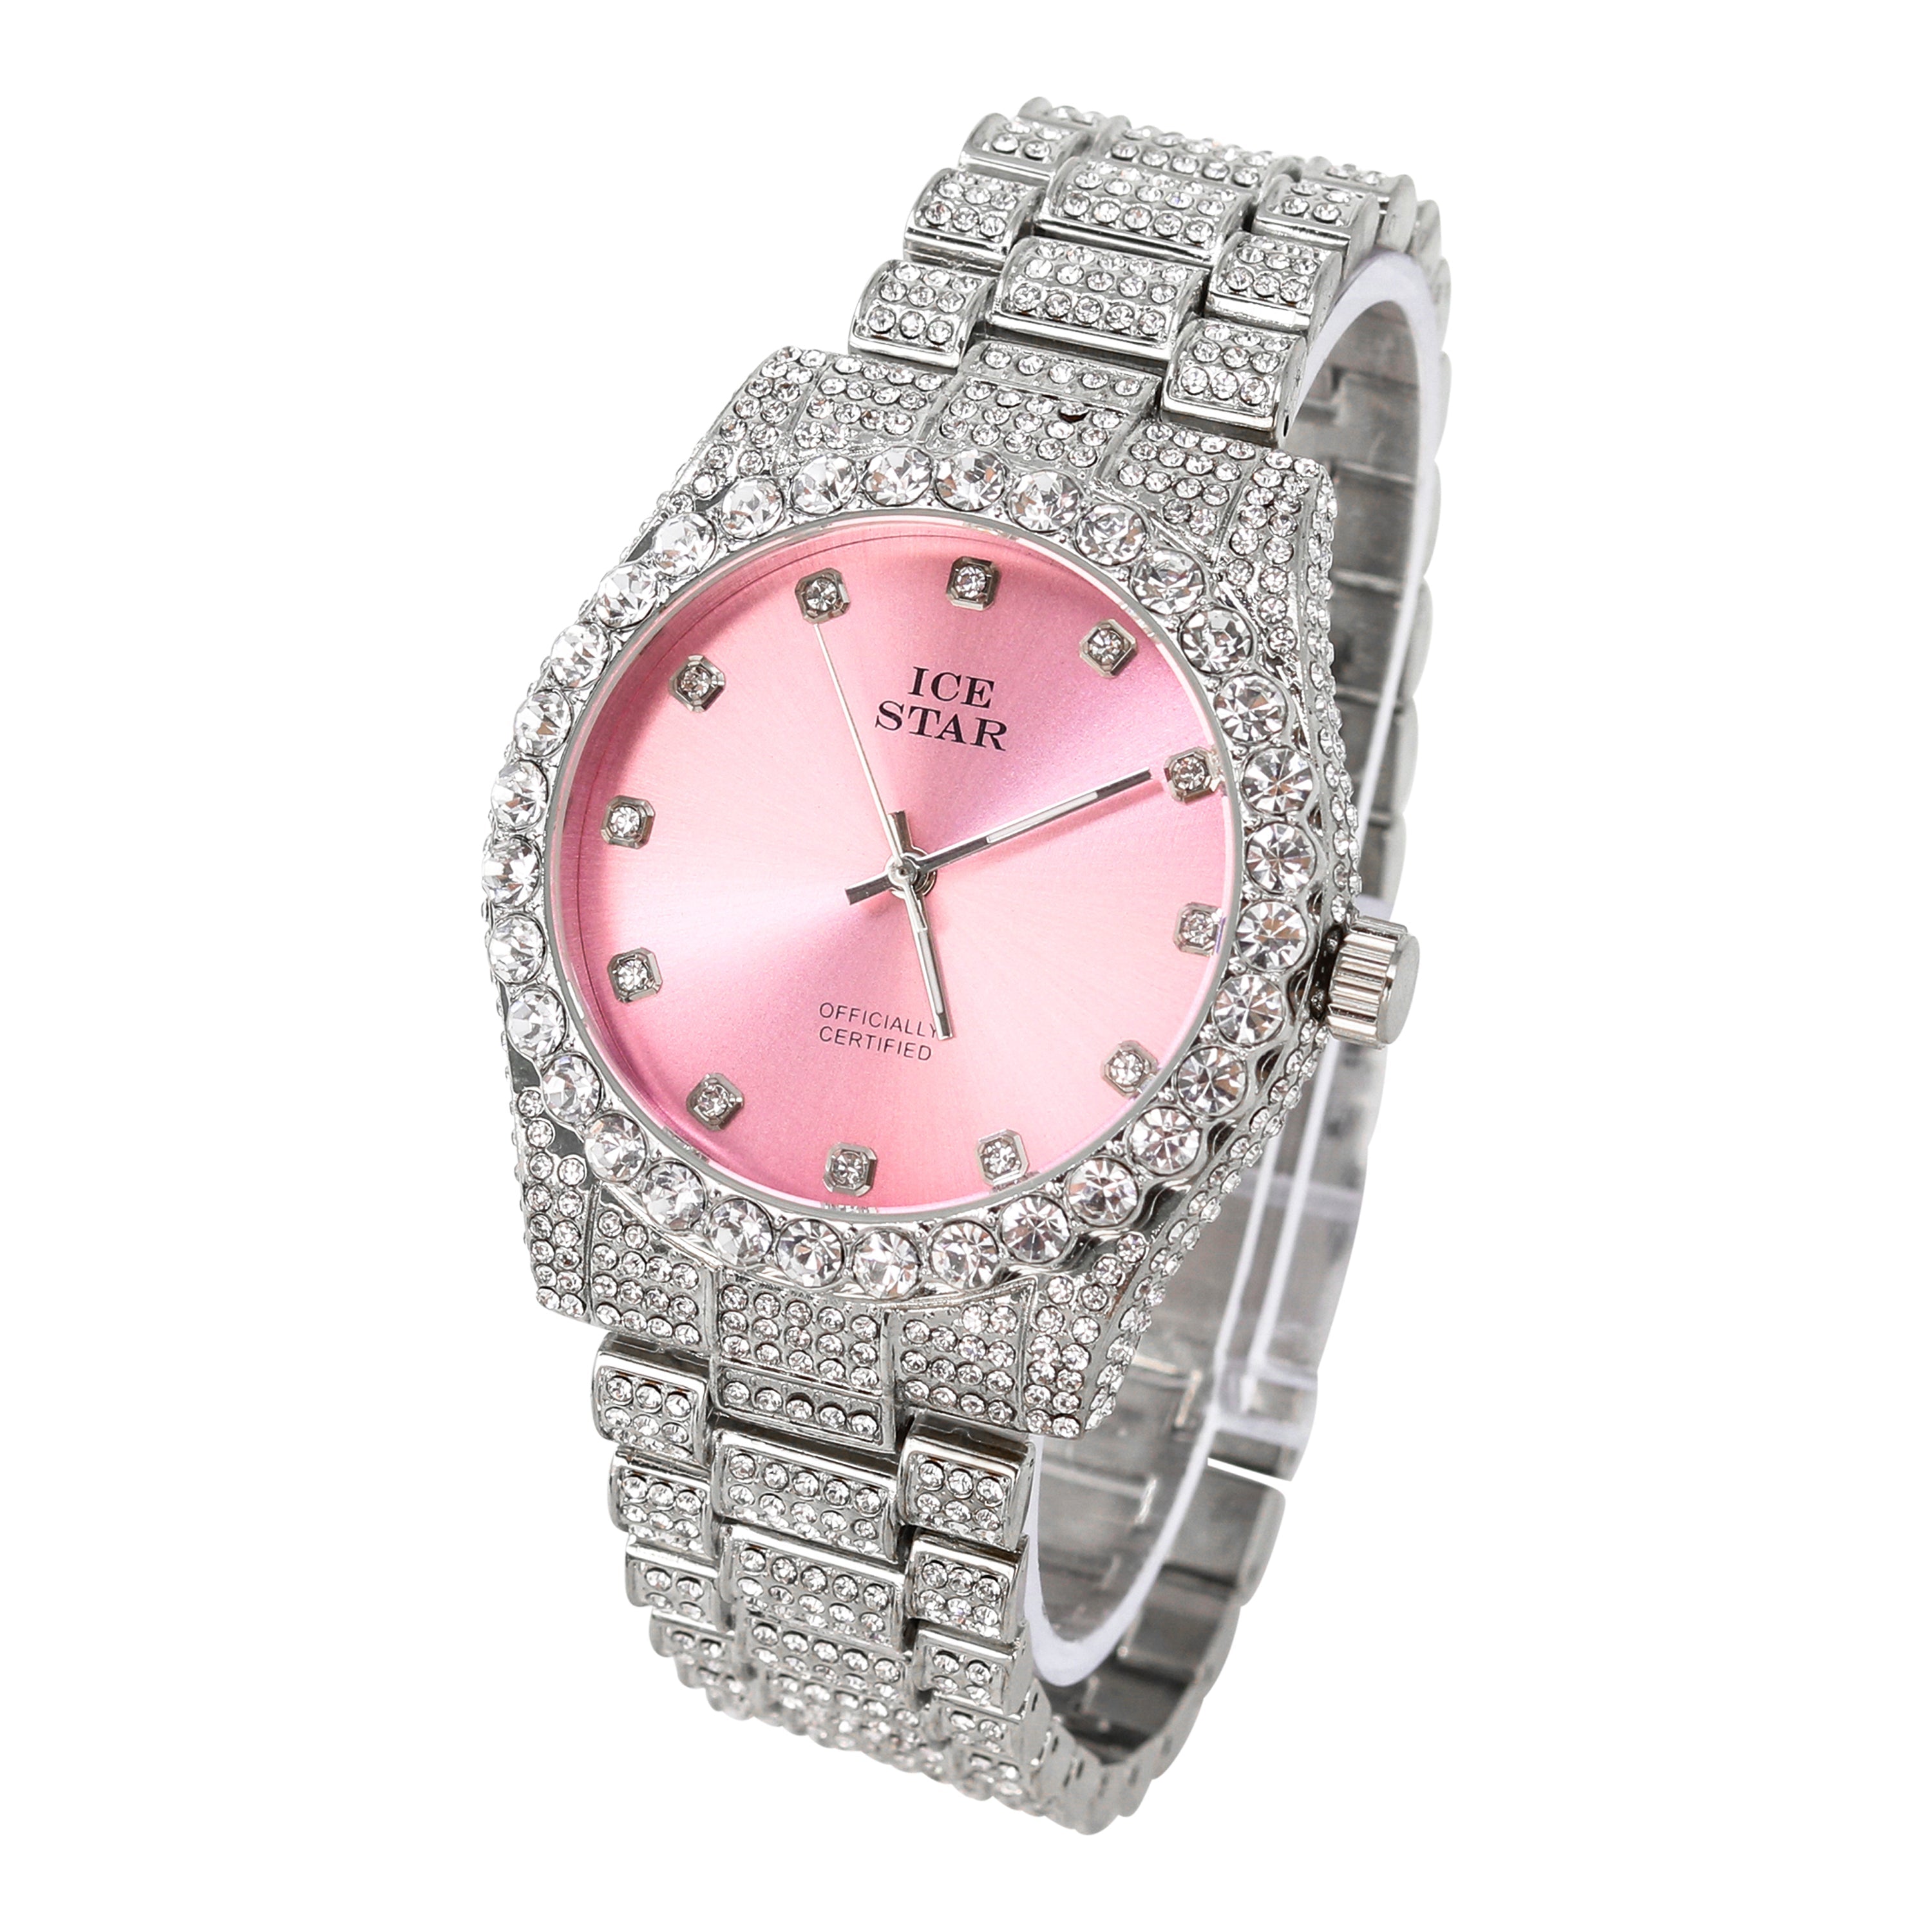 Women's Round Iced Out Watch 40mm Silver